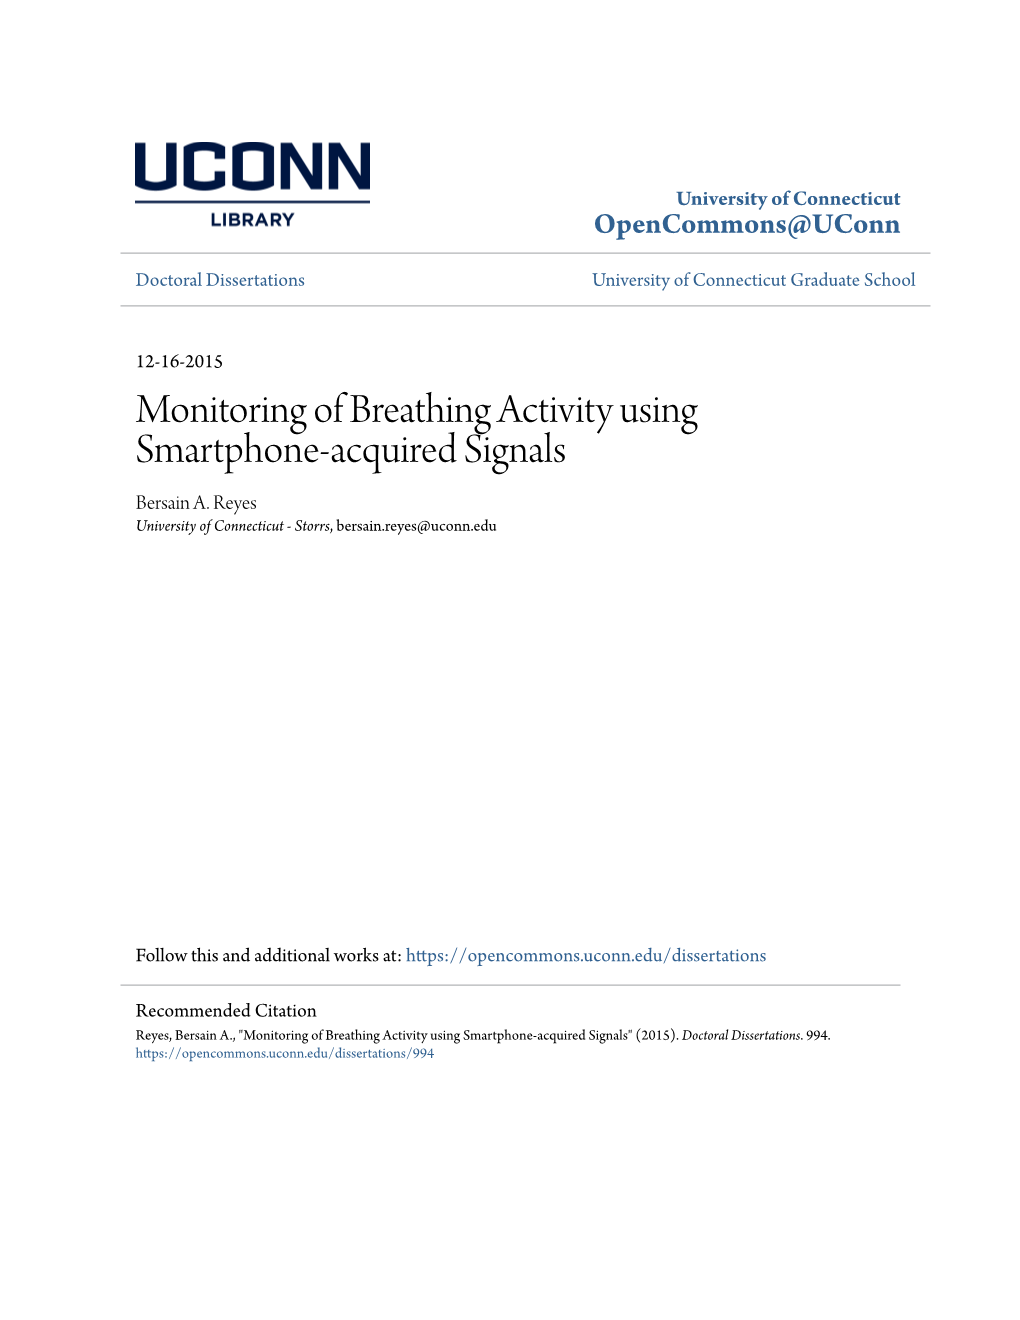 Monitoring of Breathing Activity Using Smartphone-Acquired Signals Bersain A